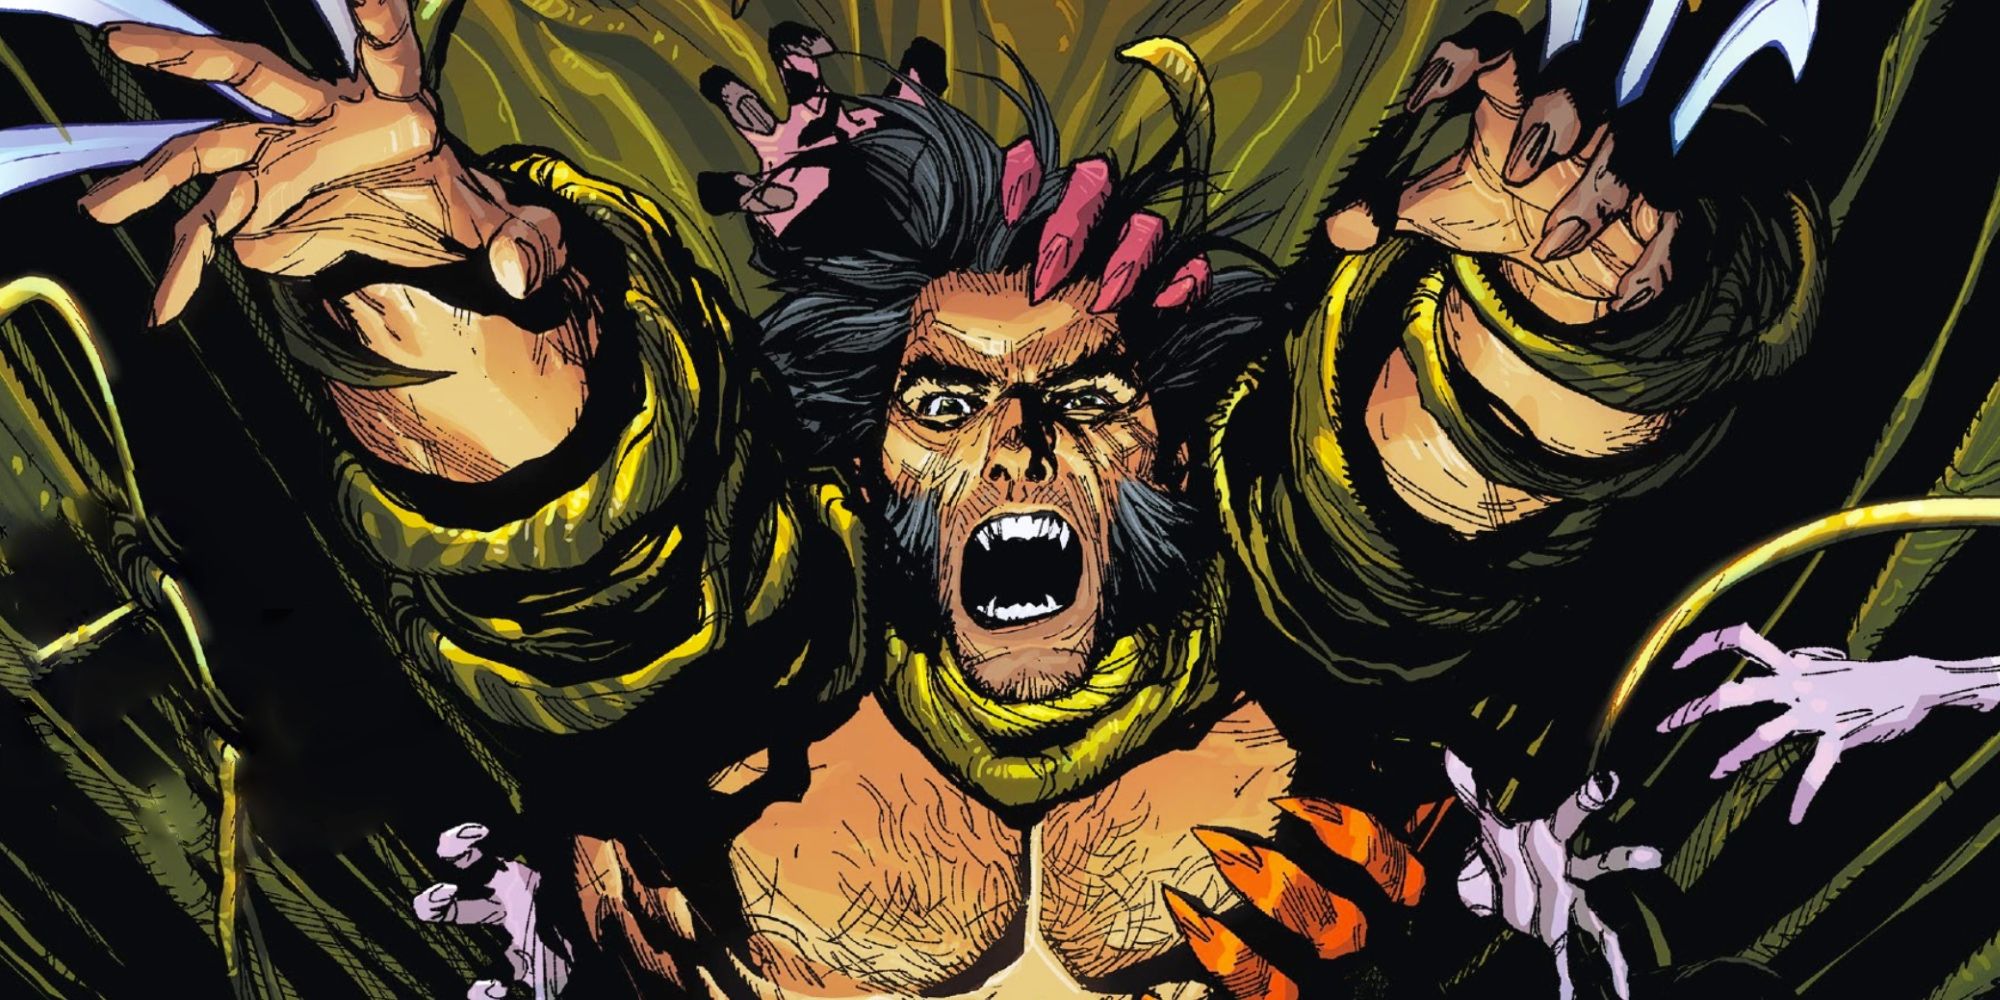 X-Men's Wolverine and X-Force in Marvel Comics